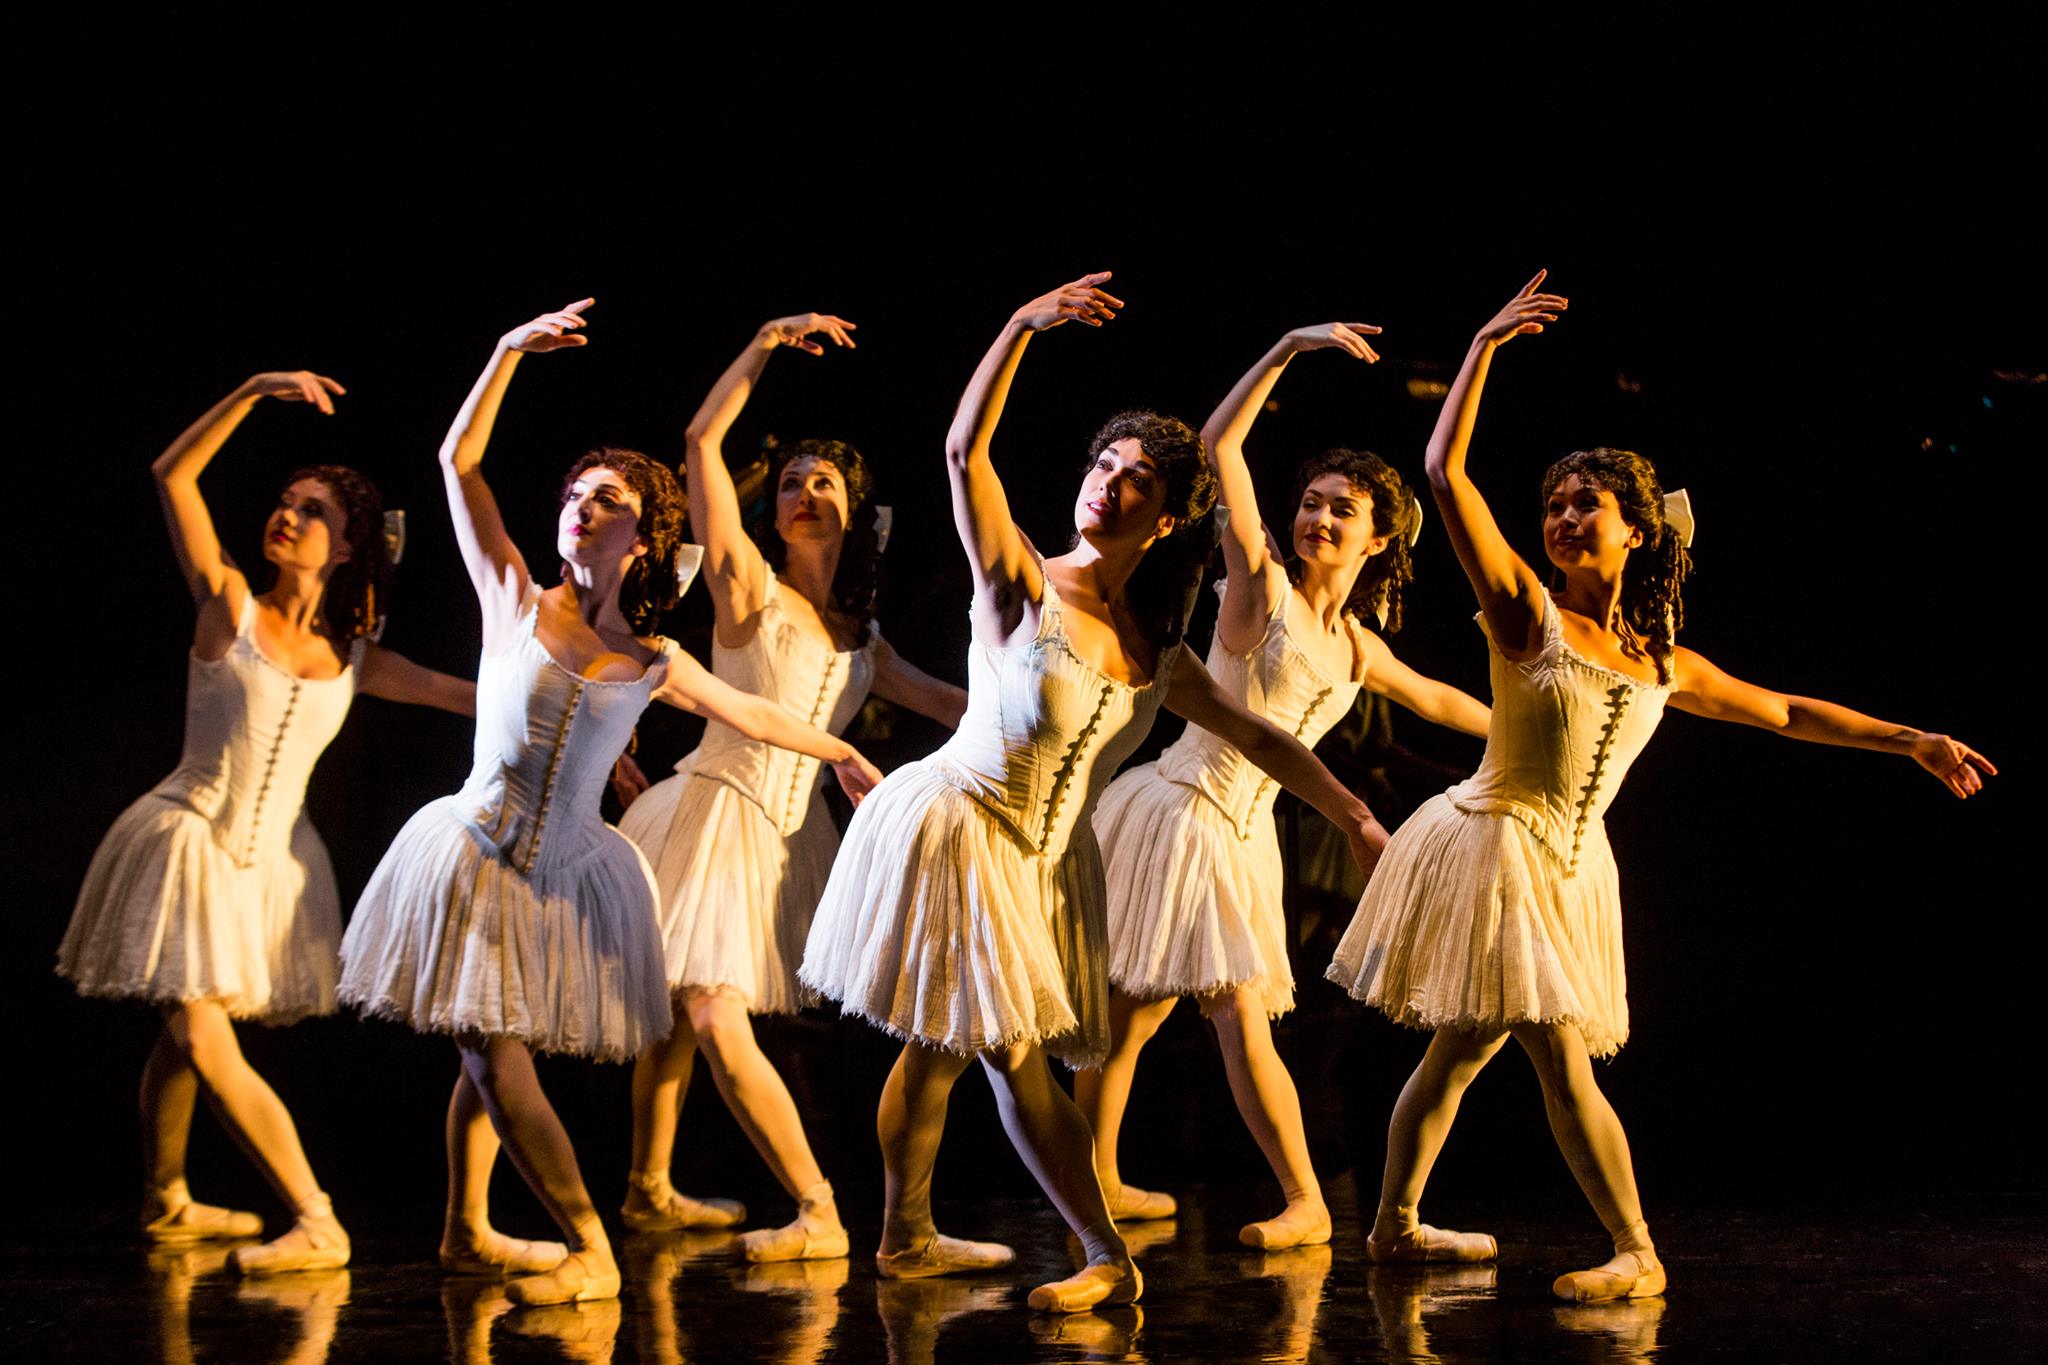 A crosp of six female ballet dancers stand in two staggered lines and pose in a croise fourth position plié with their right leg in front. They hold their arms in third position, looking underneath their raised right arm. All of the women wear knee-length tutus and corseted bodices, tights and pointe shoes, and wear their hair in curls, secured back with a large bow.